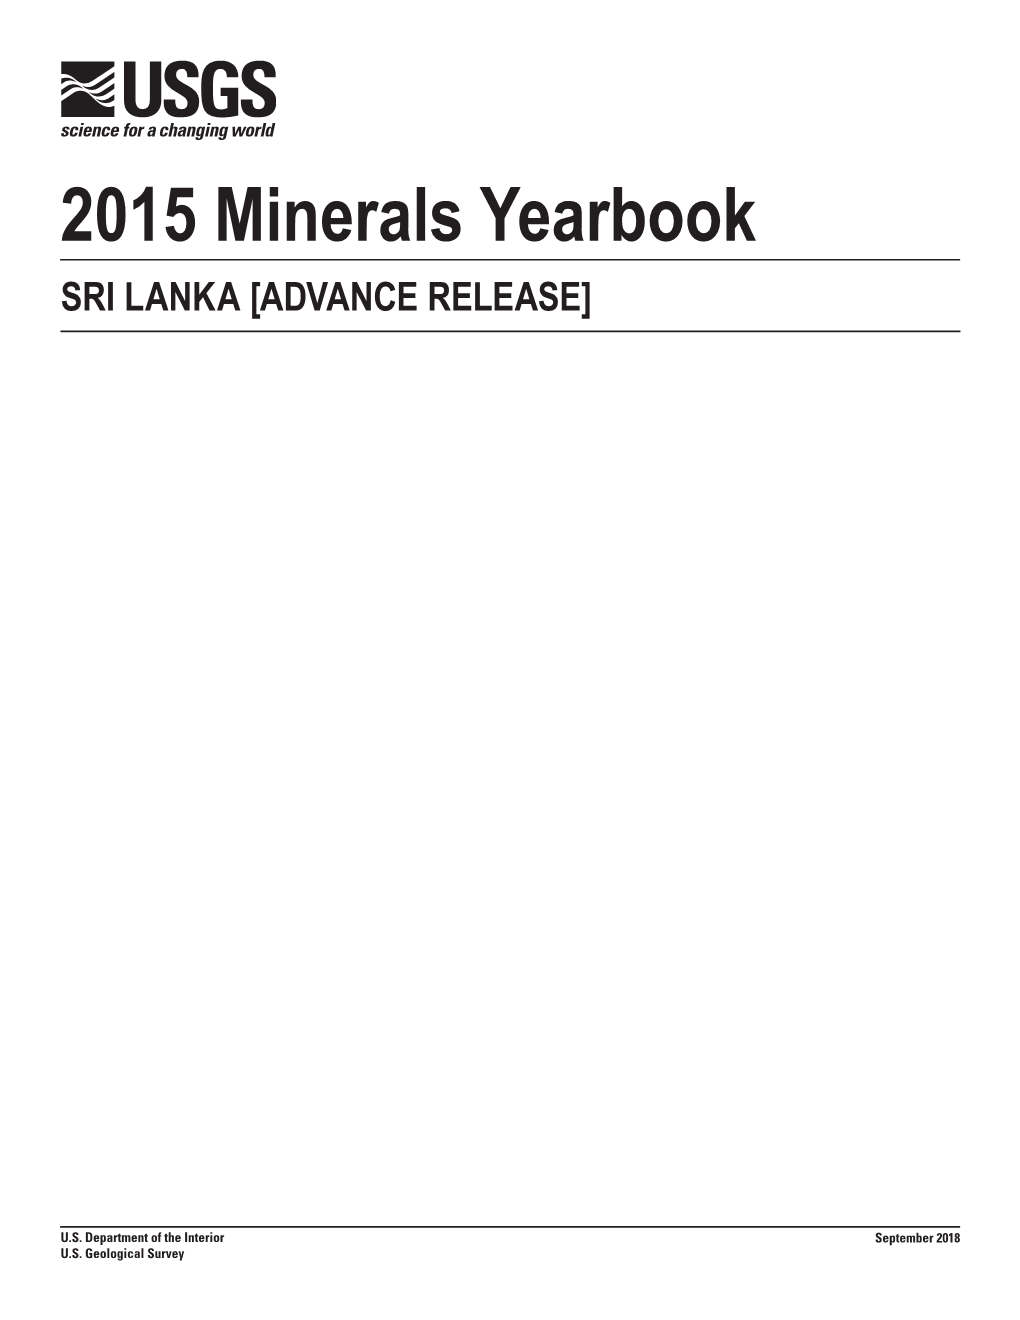 The Mineral Industry of Sri Lanka in 2015